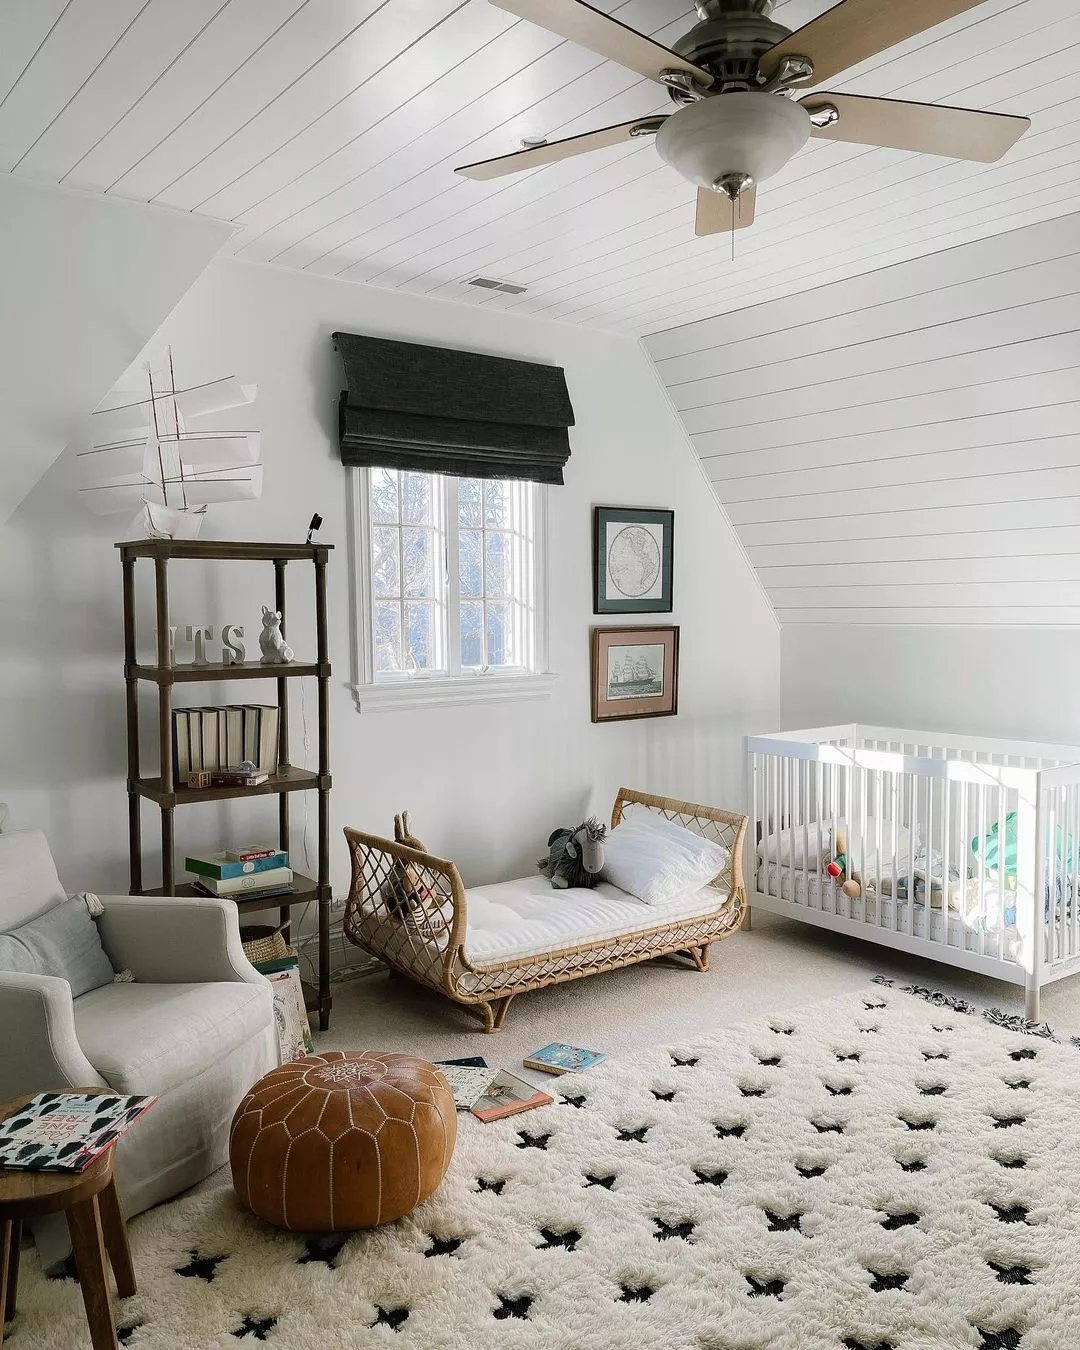 Baby Proofing Your House